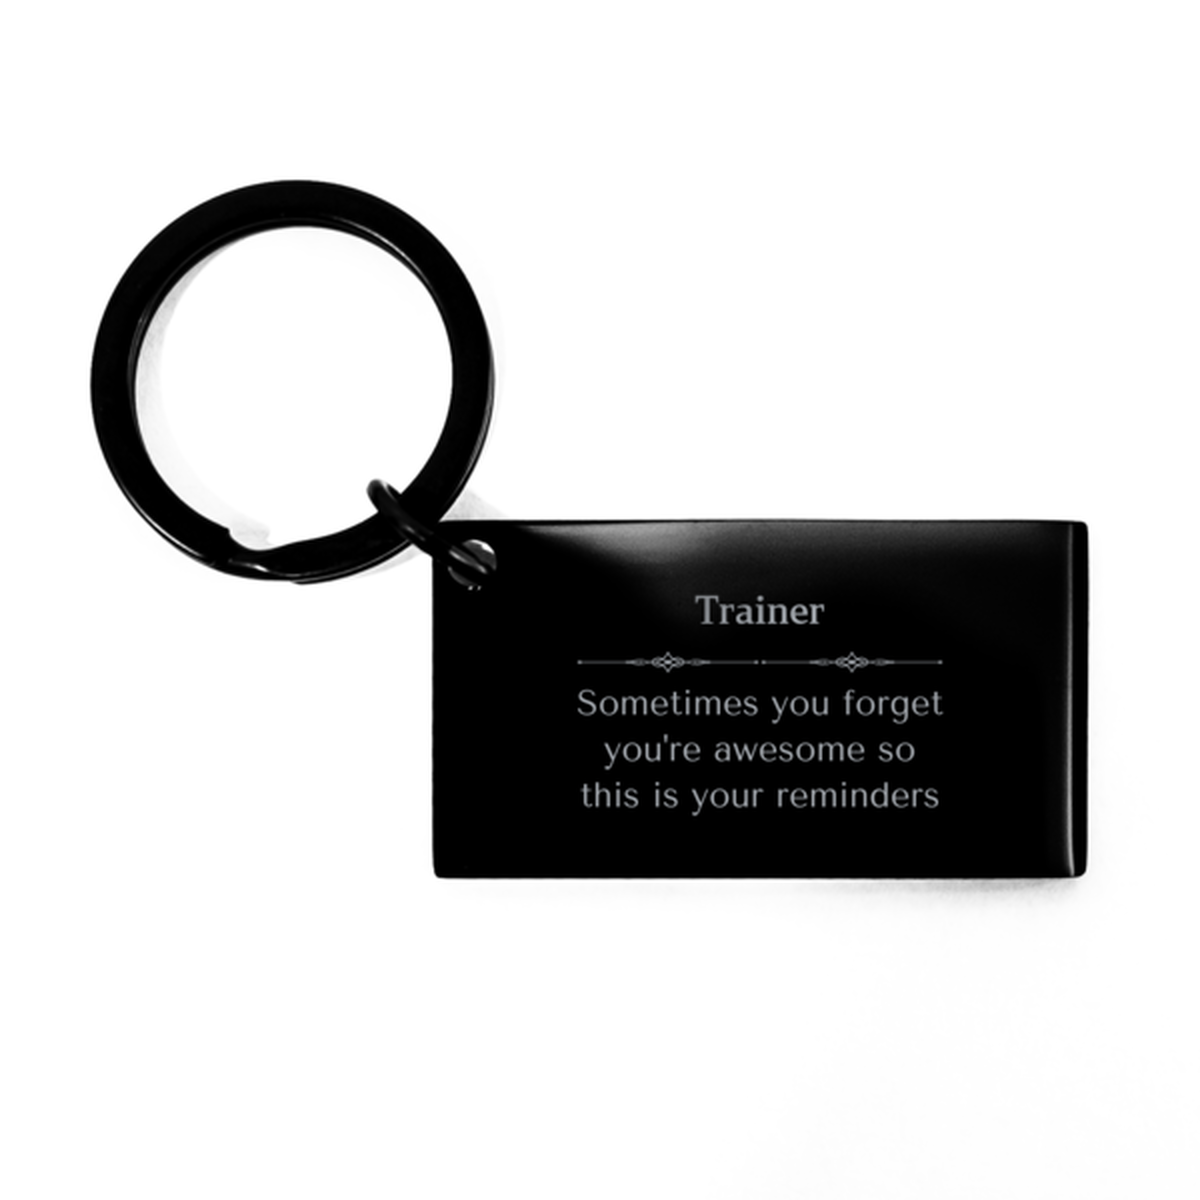 Sentimental Trainer Keychain, Accountant Sometimes you forget you're awesome so this is your reminders, Graduation Christmas Birthday Gifts for Trainer, Men, Women, Coworkers